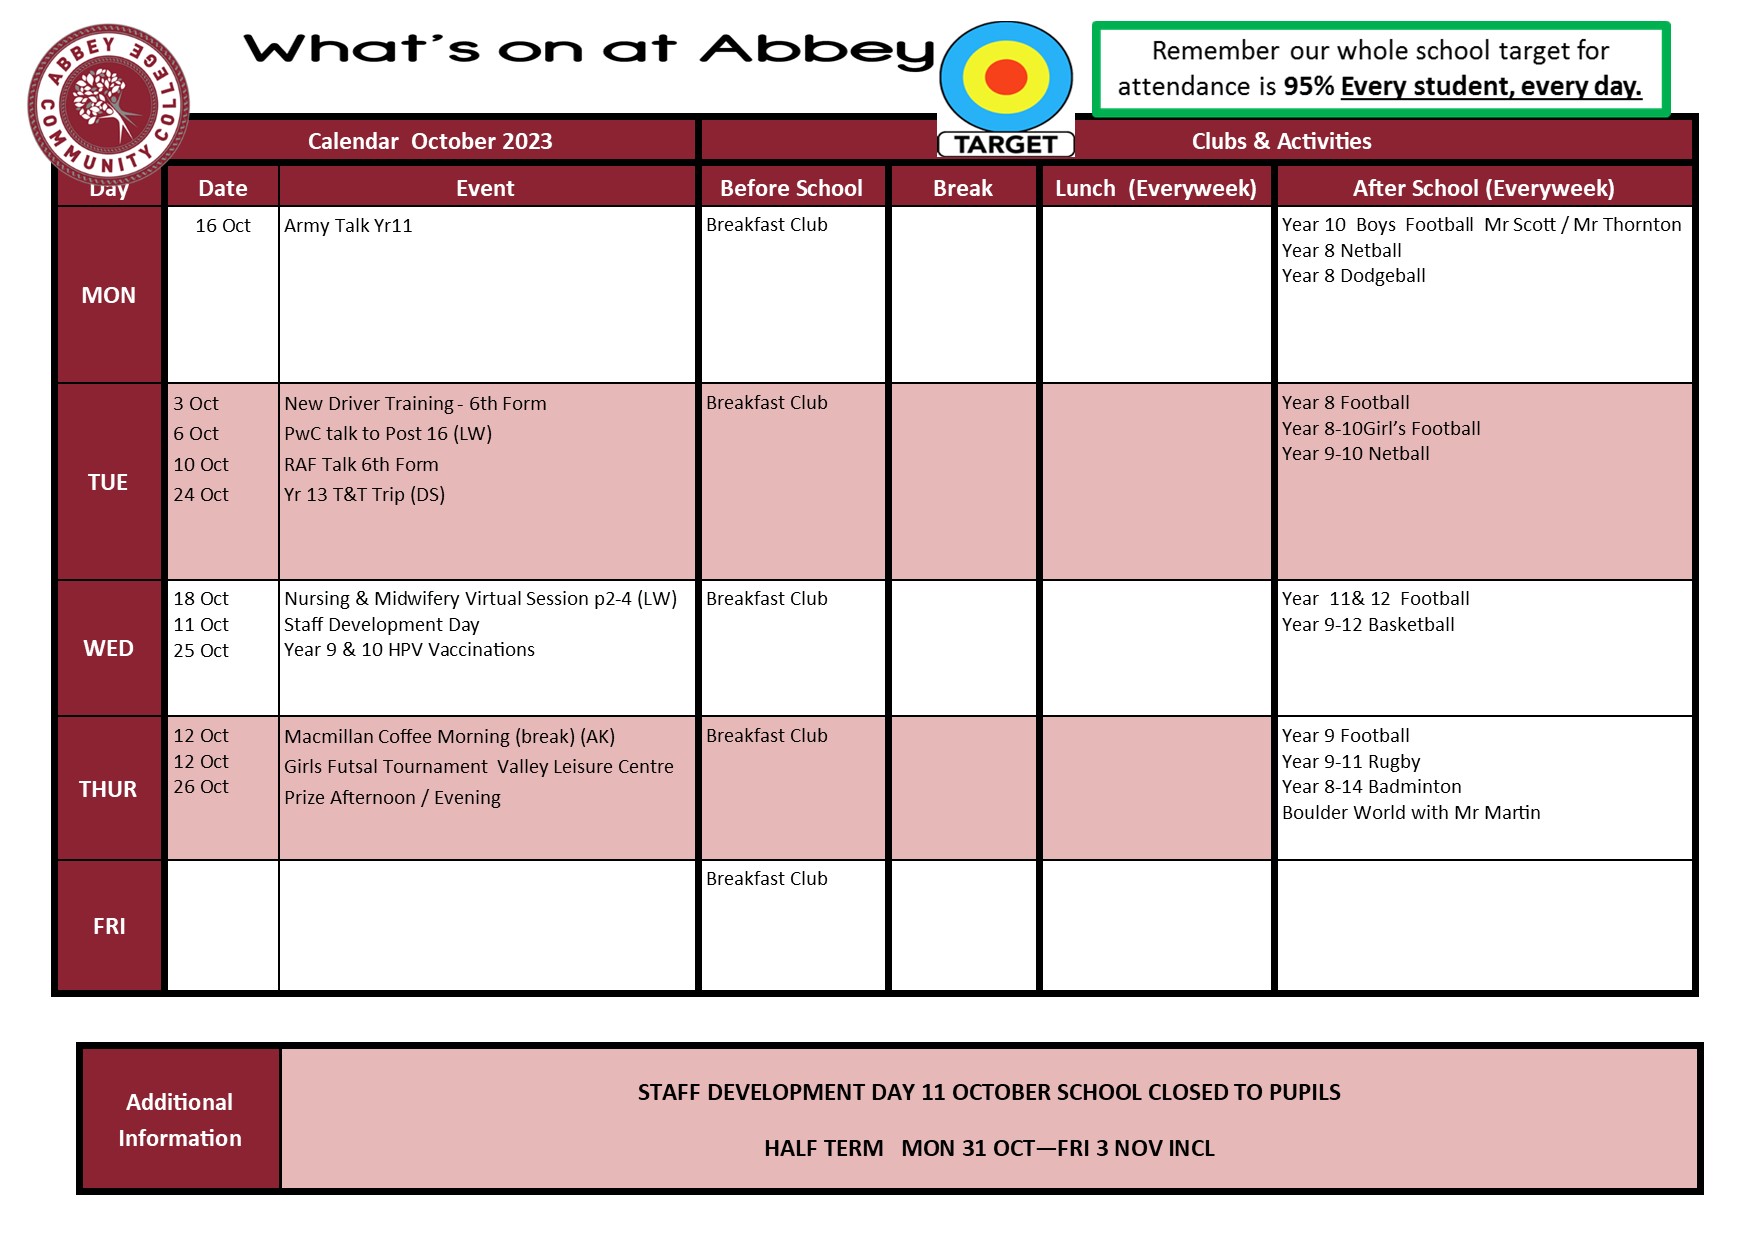 Whats on at Abbey October 2023 1.jpg